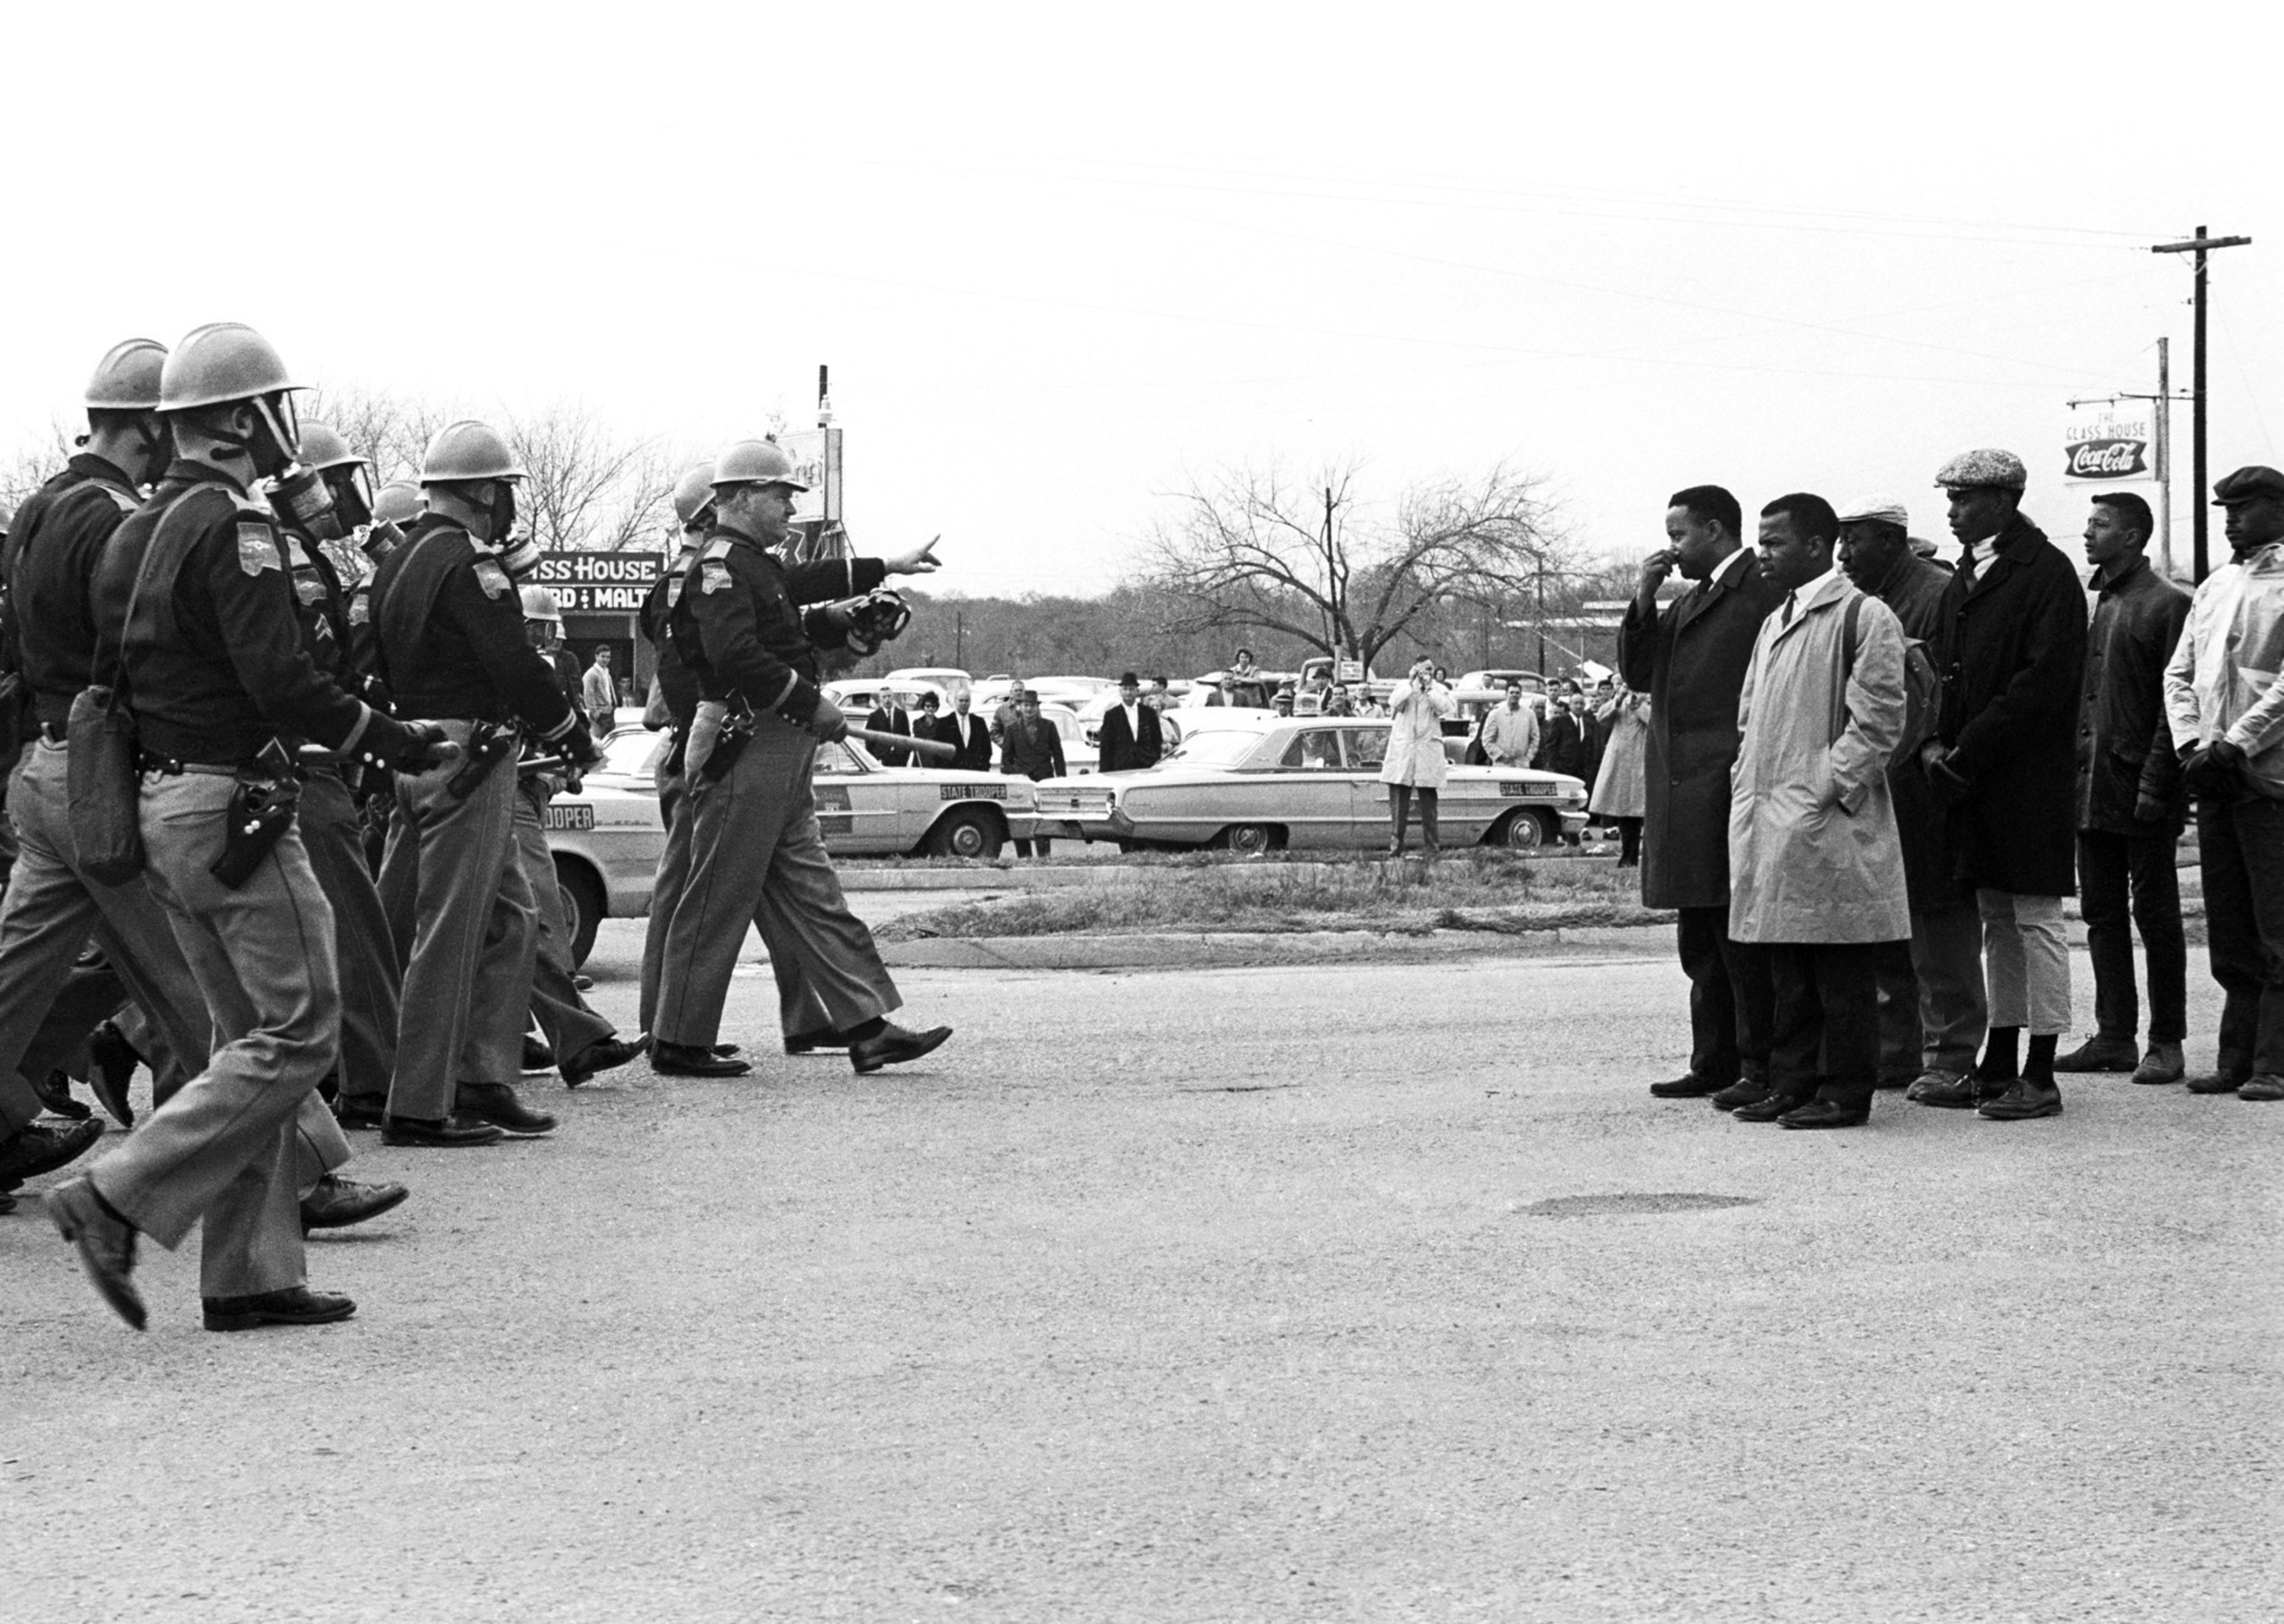 Police and protesters face off over voting rights in Selma, Ala., May 7, 1965, a day forever known as Bloody Sunday. A new exhibit, "1965: Civil Rights at 50" opens Friday, Jan. 16, at the Newseum in Washington, D.C. Credit: Spider Martin